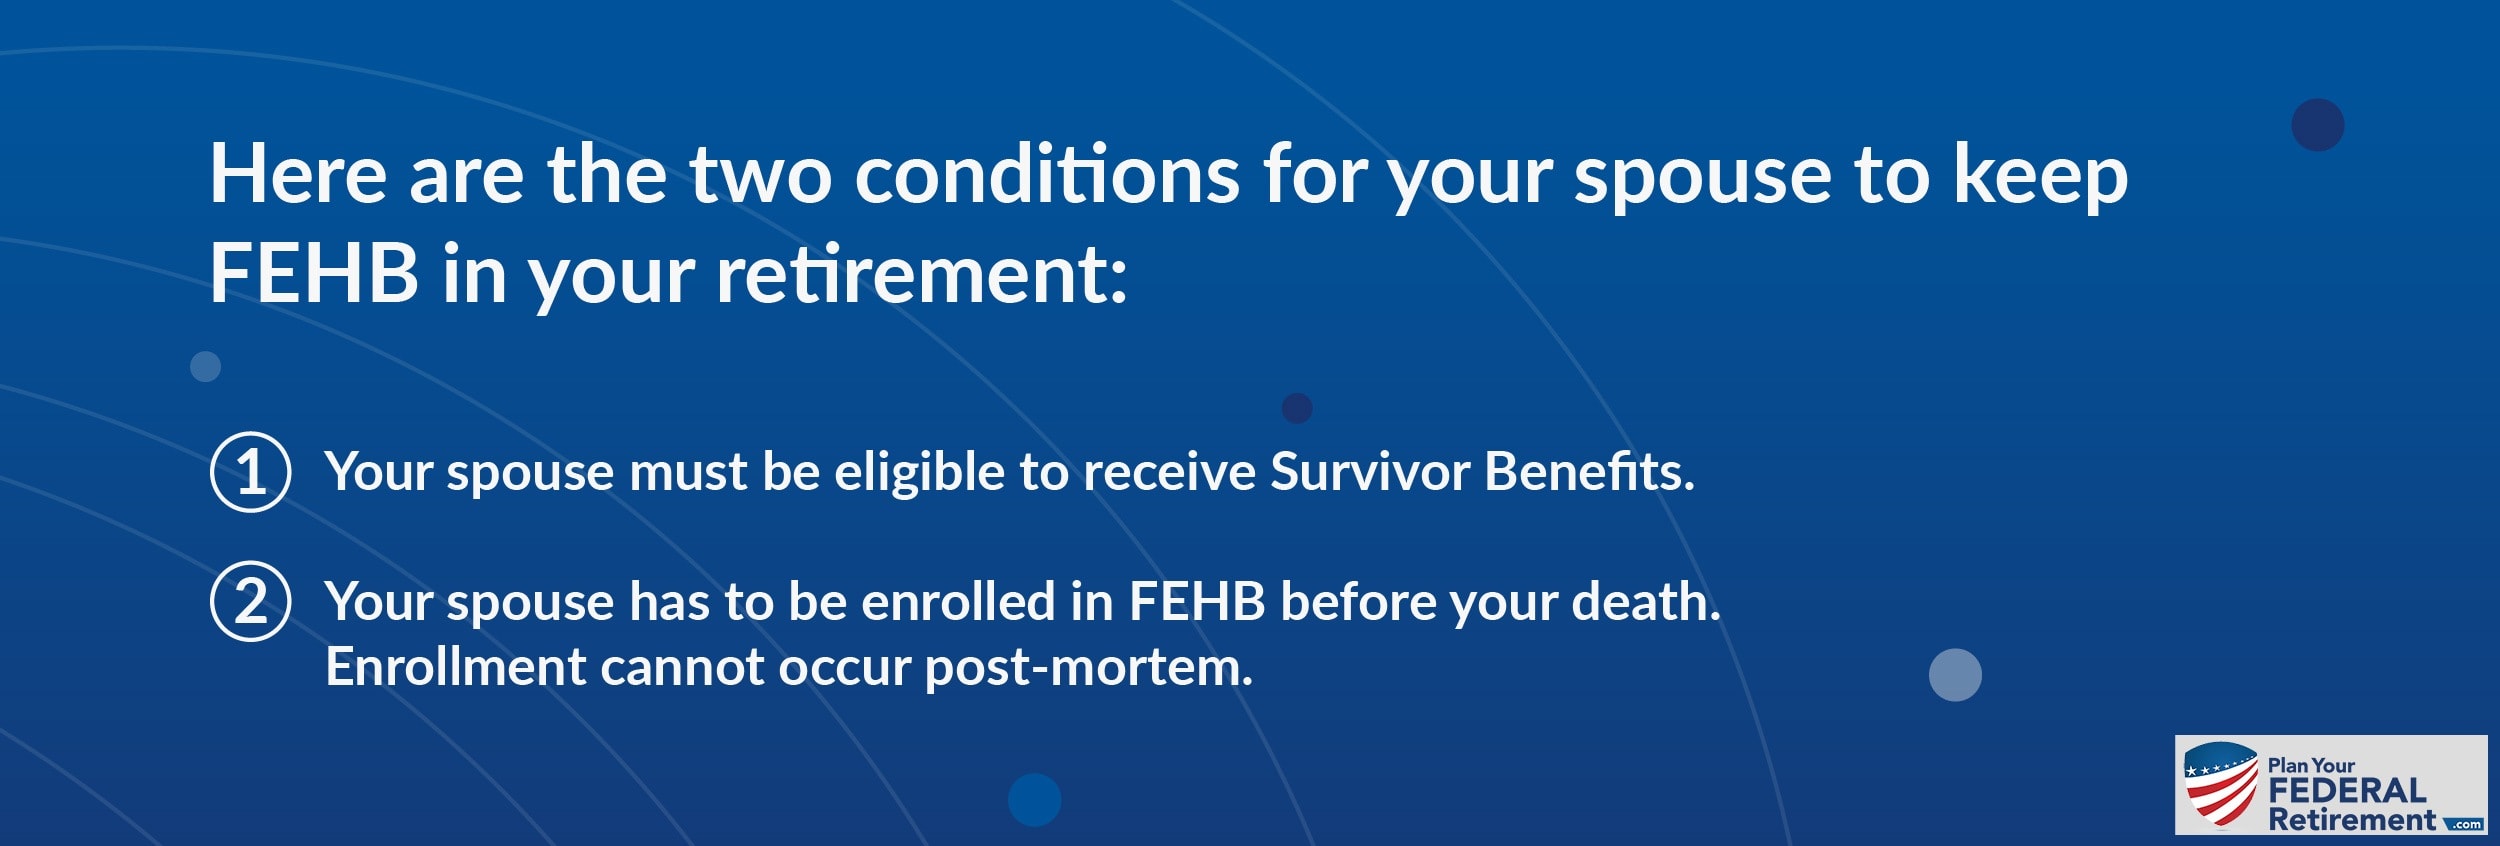 Conditions for your spouse to keep FEHB in your retirement